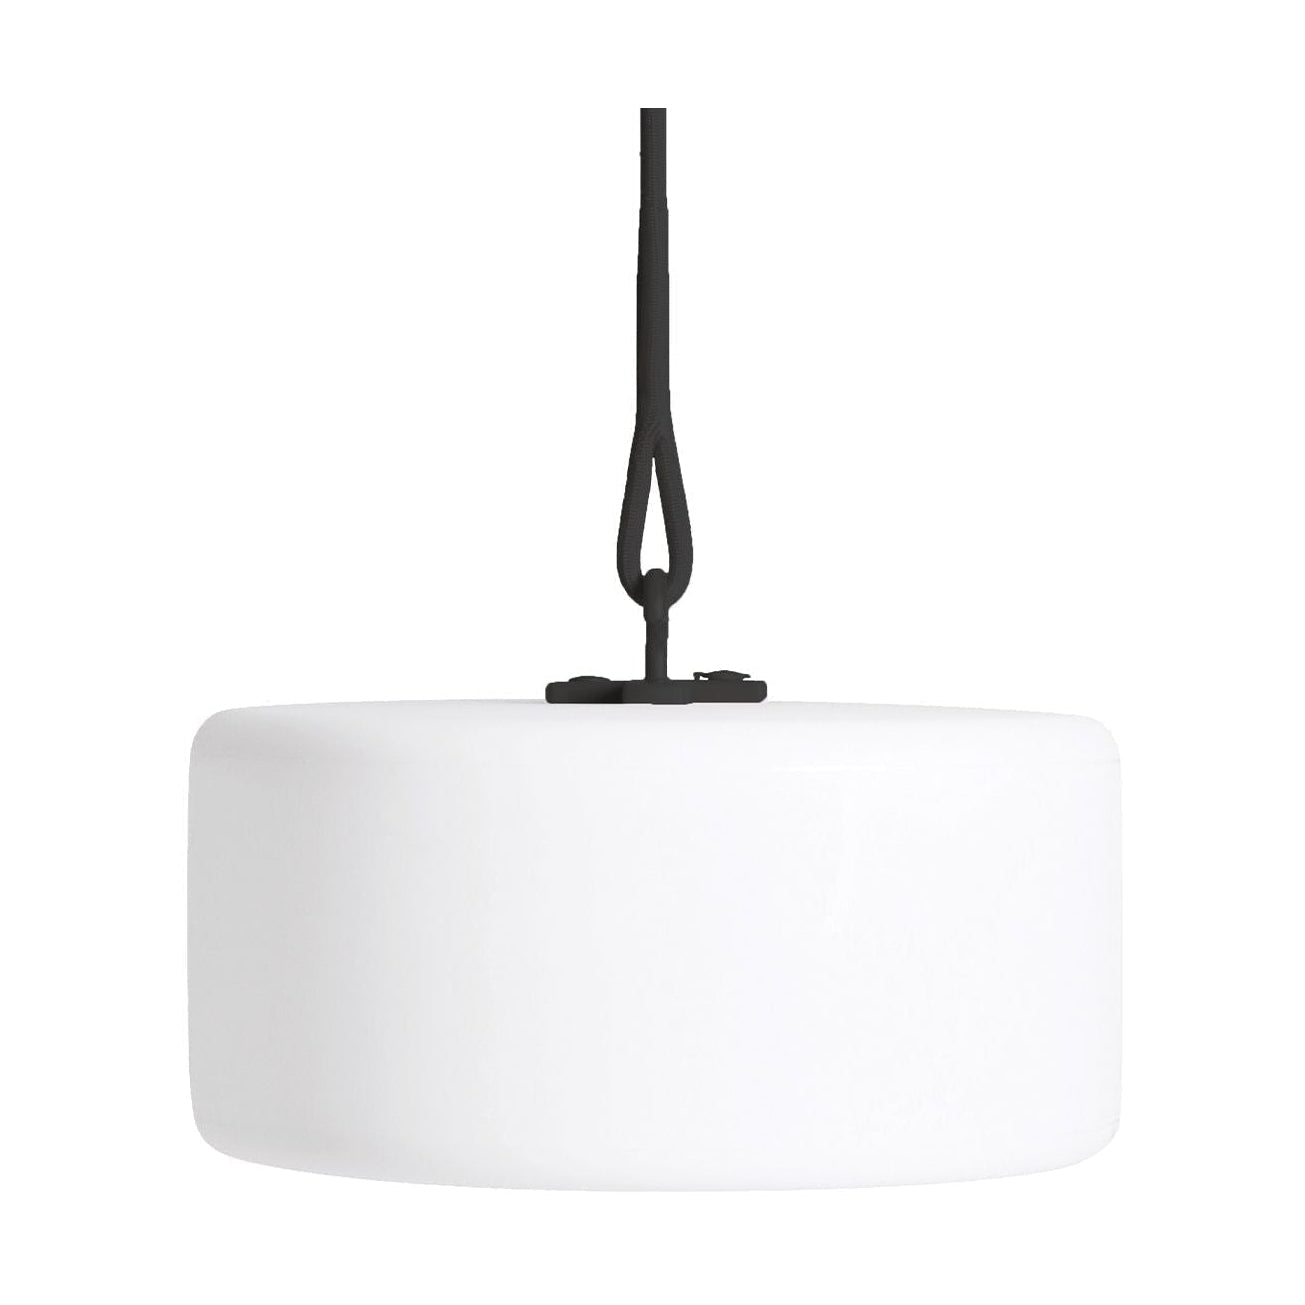 Fatboy Thierry Le Swinger Suspension Lamp, Anthracite